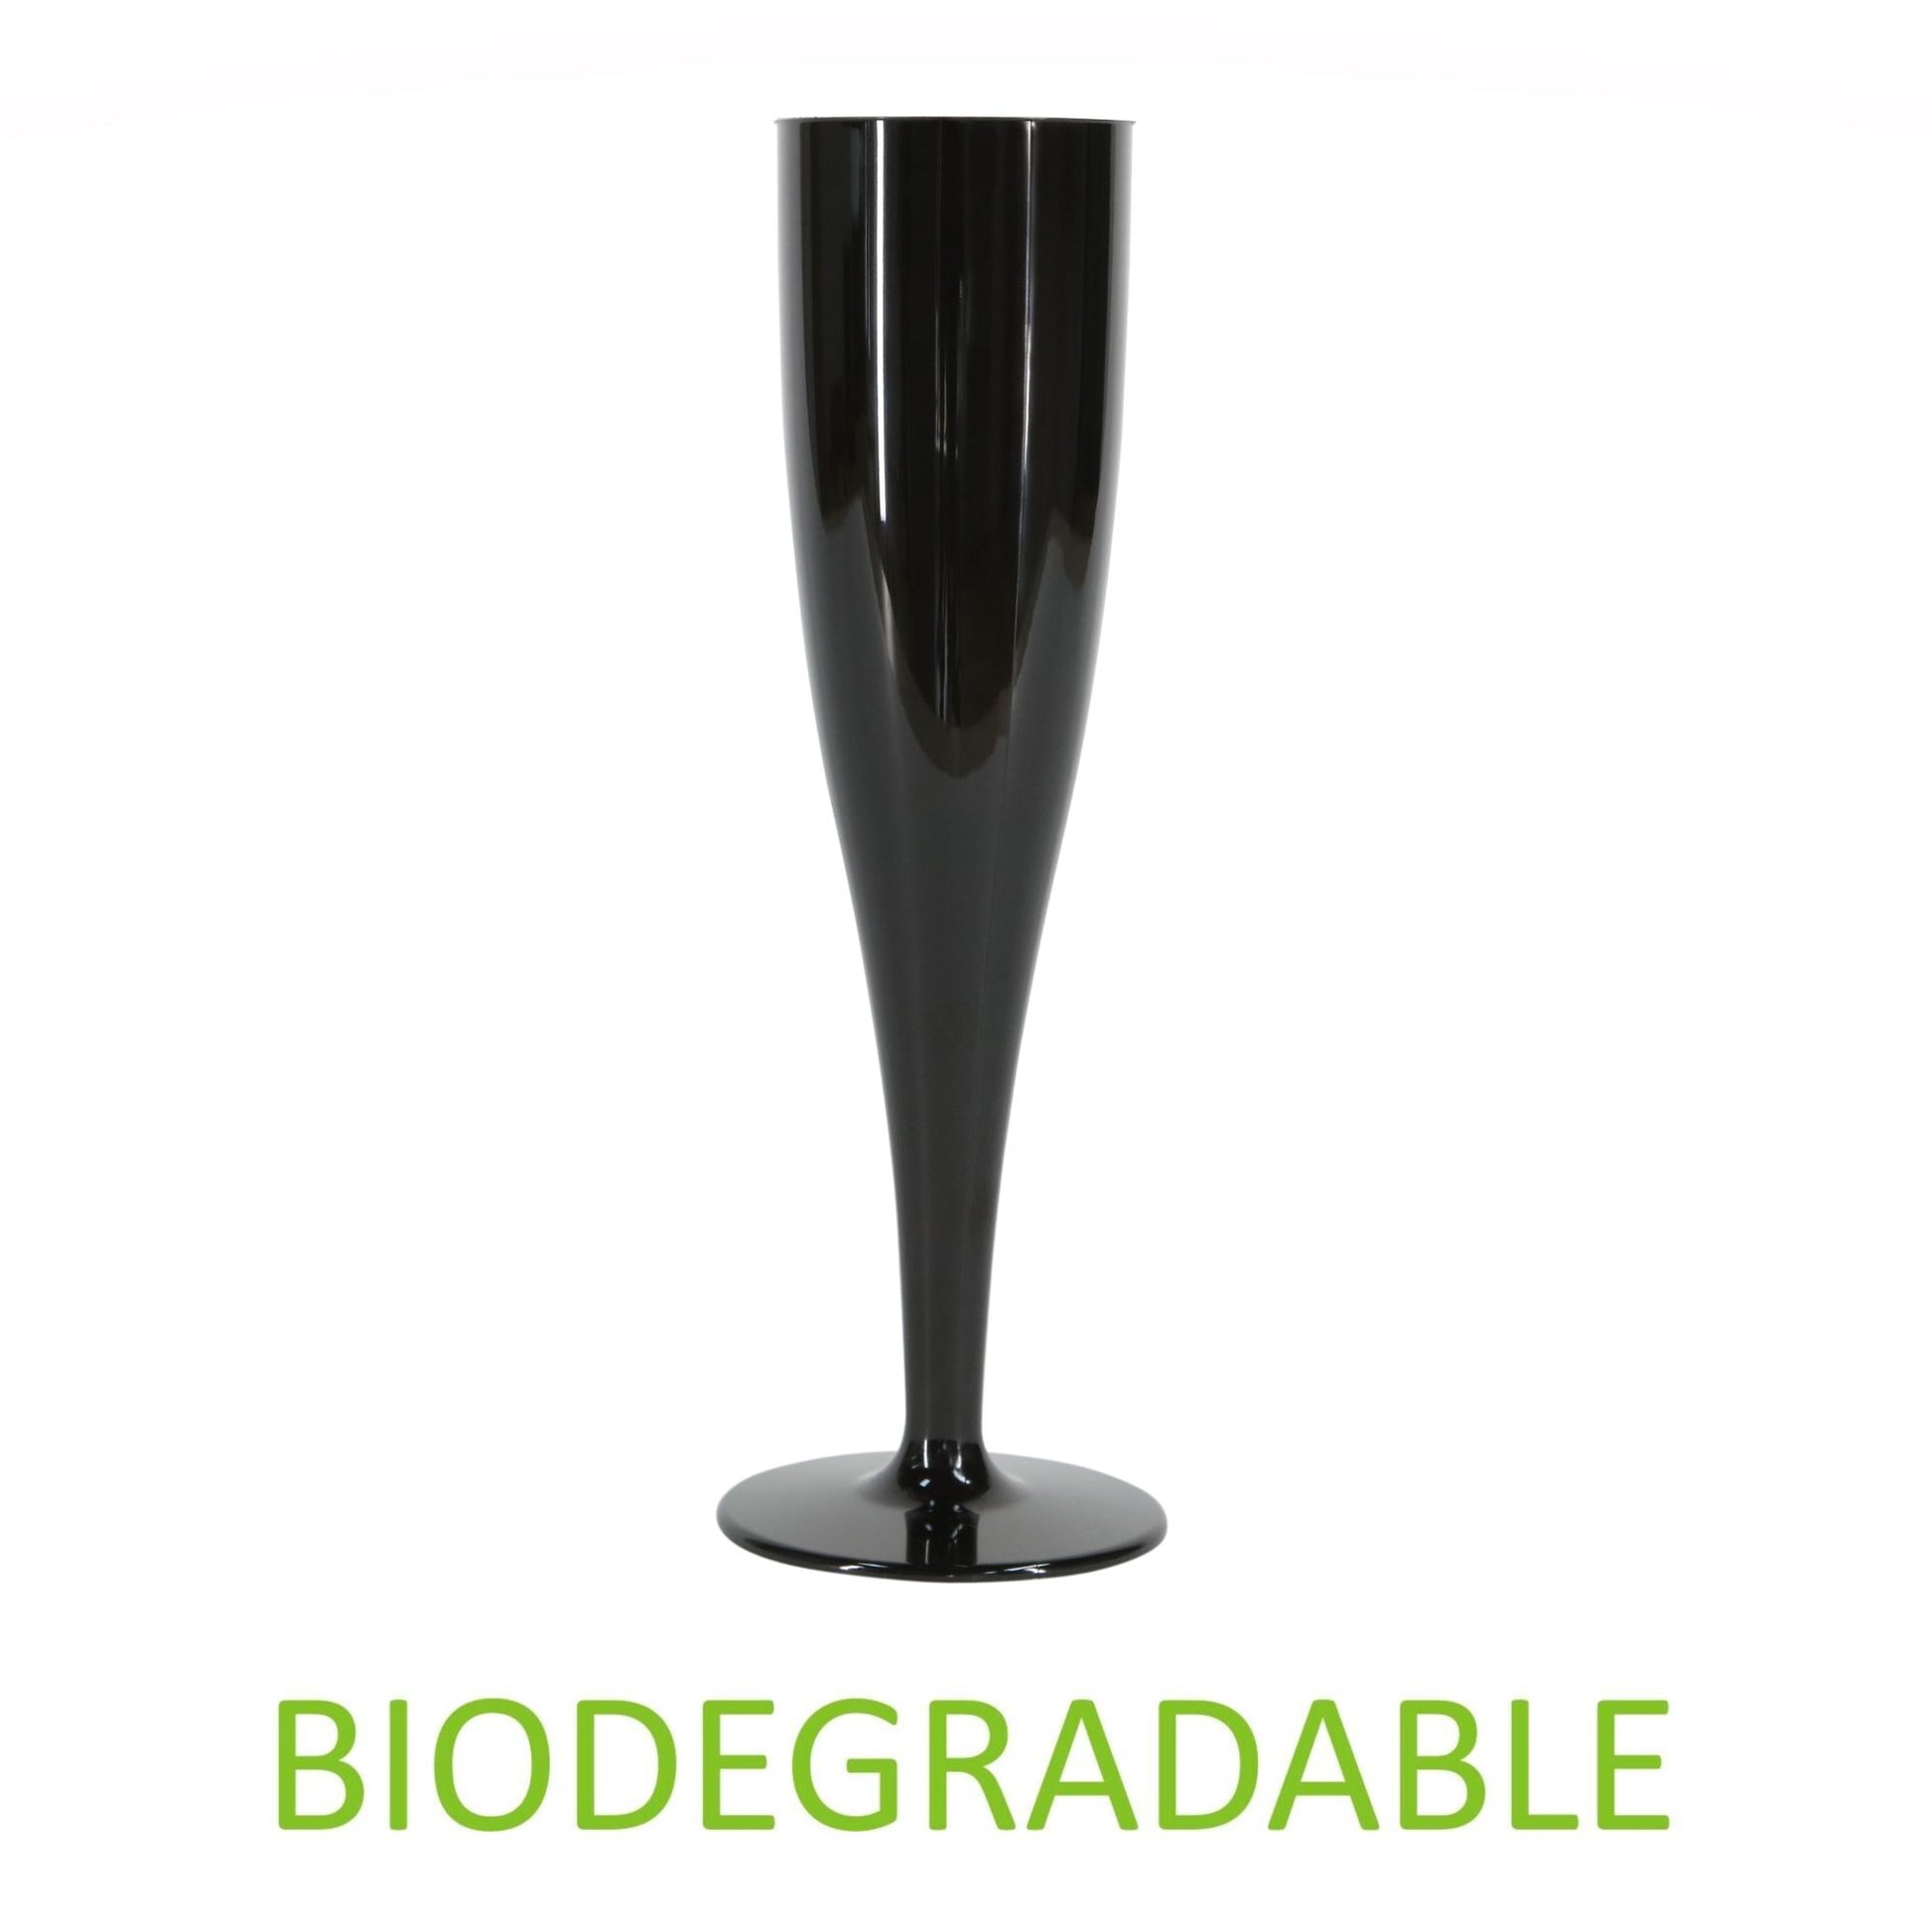 100 x Black Prosecco Flutes – Made from Biodegradable Material in glossy Bold Black Colour 1-Piece Champagne Glass (Pack of 100 Glasses) for use Indoors and Outdoors, Halloween, Parties, BBQ, Hen Do-5056020186793-EY-PP-118-Product Pro-Black Flutes, Champagne Flute, Champagne Glasses, Flutes, Prosecco Flute, Prosecco Glasses